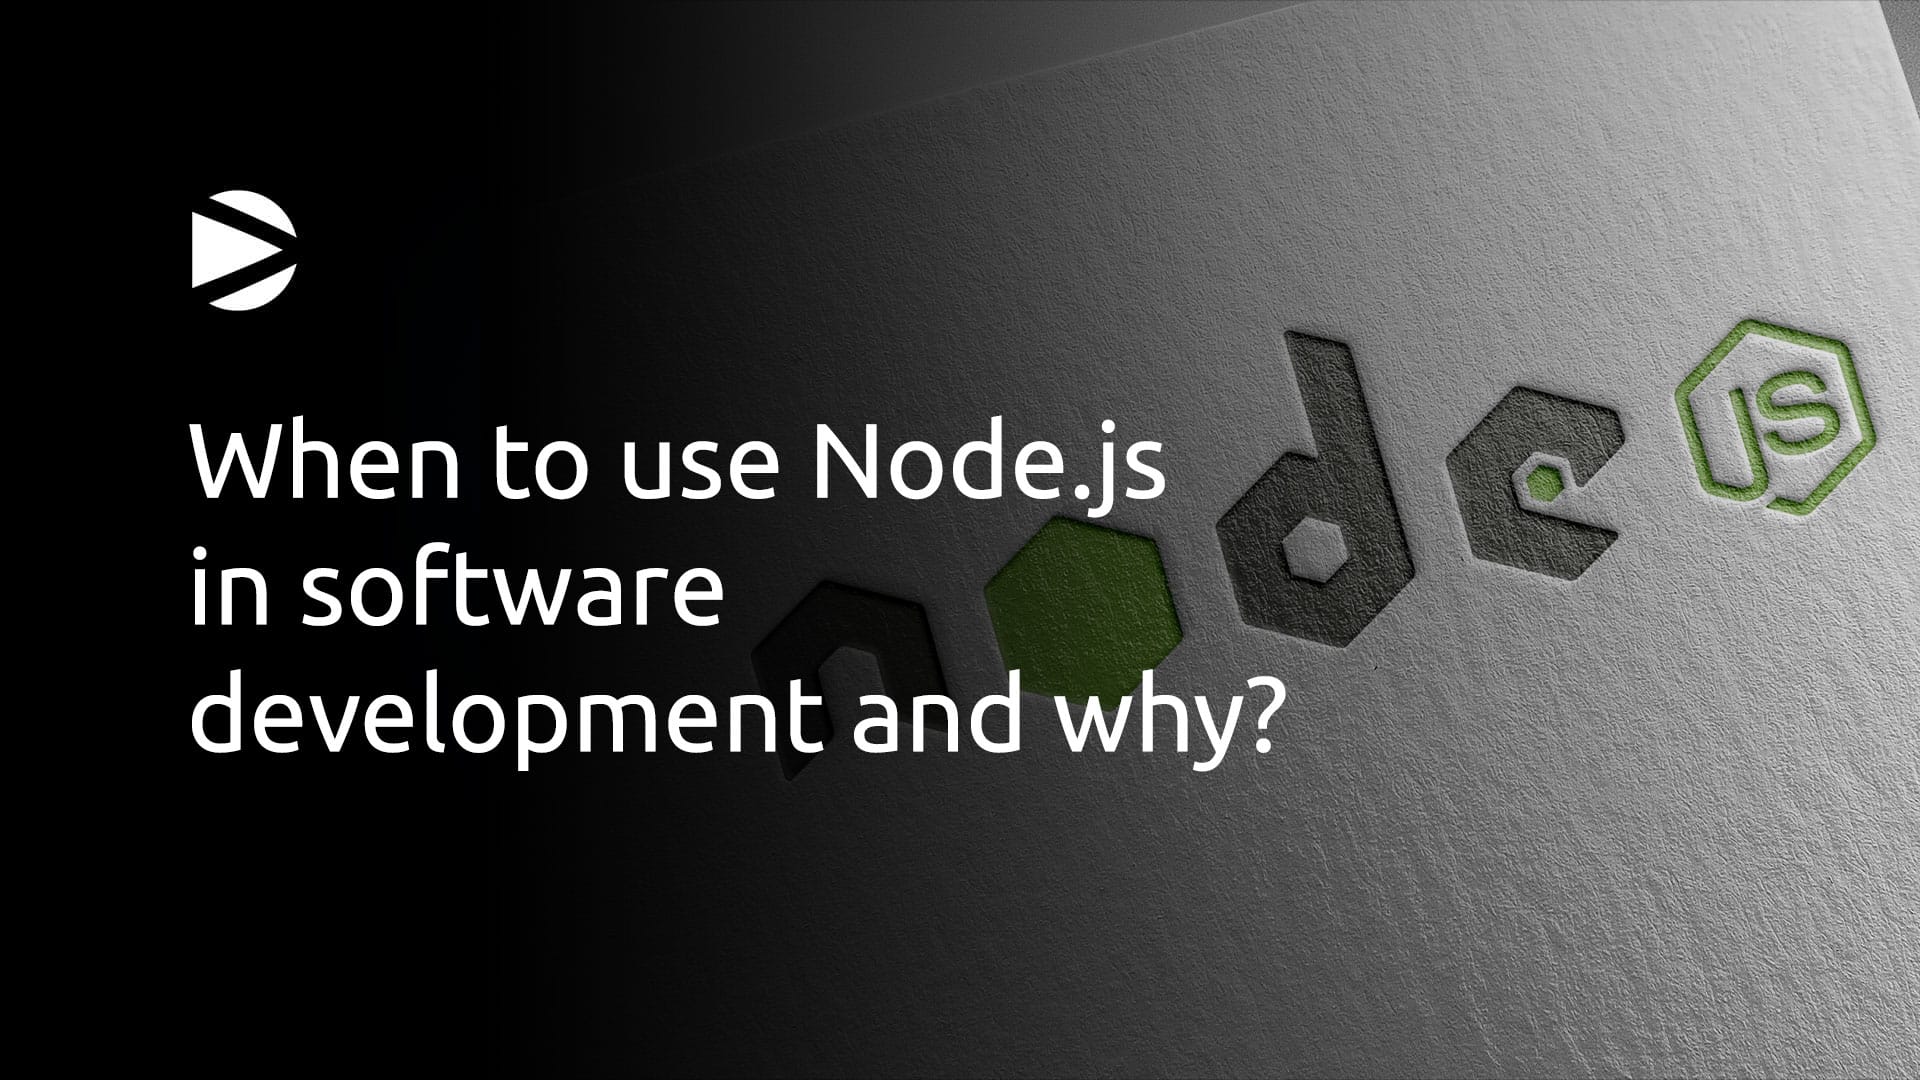 When to use Node.js in software development and why?